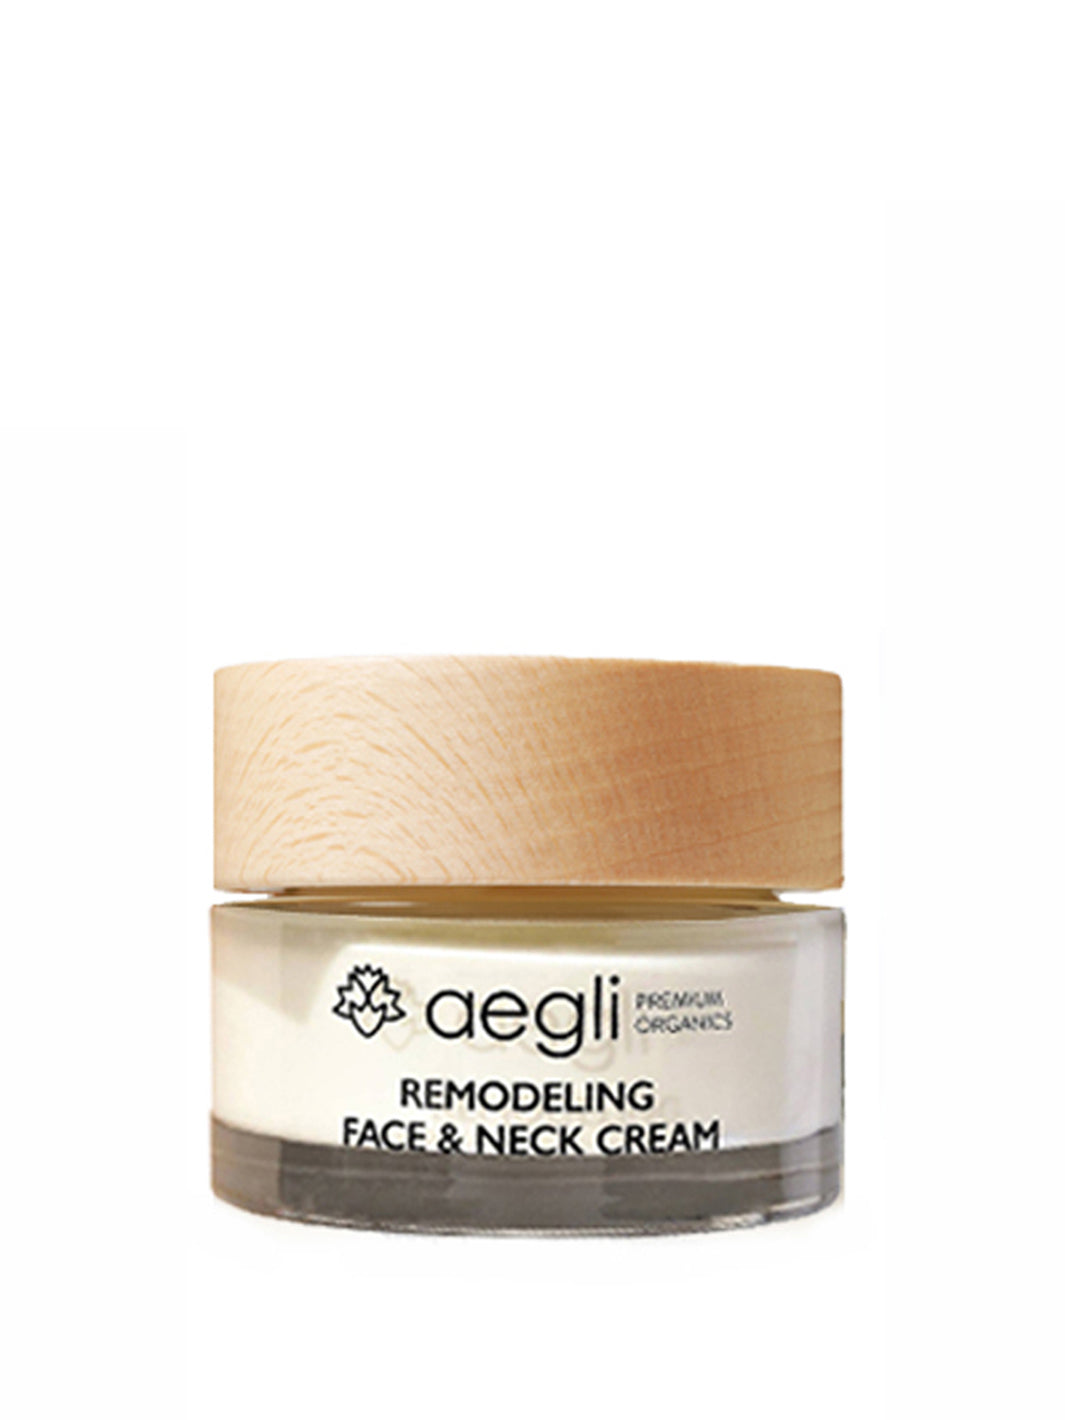 Remodeling Face & Neck Cream